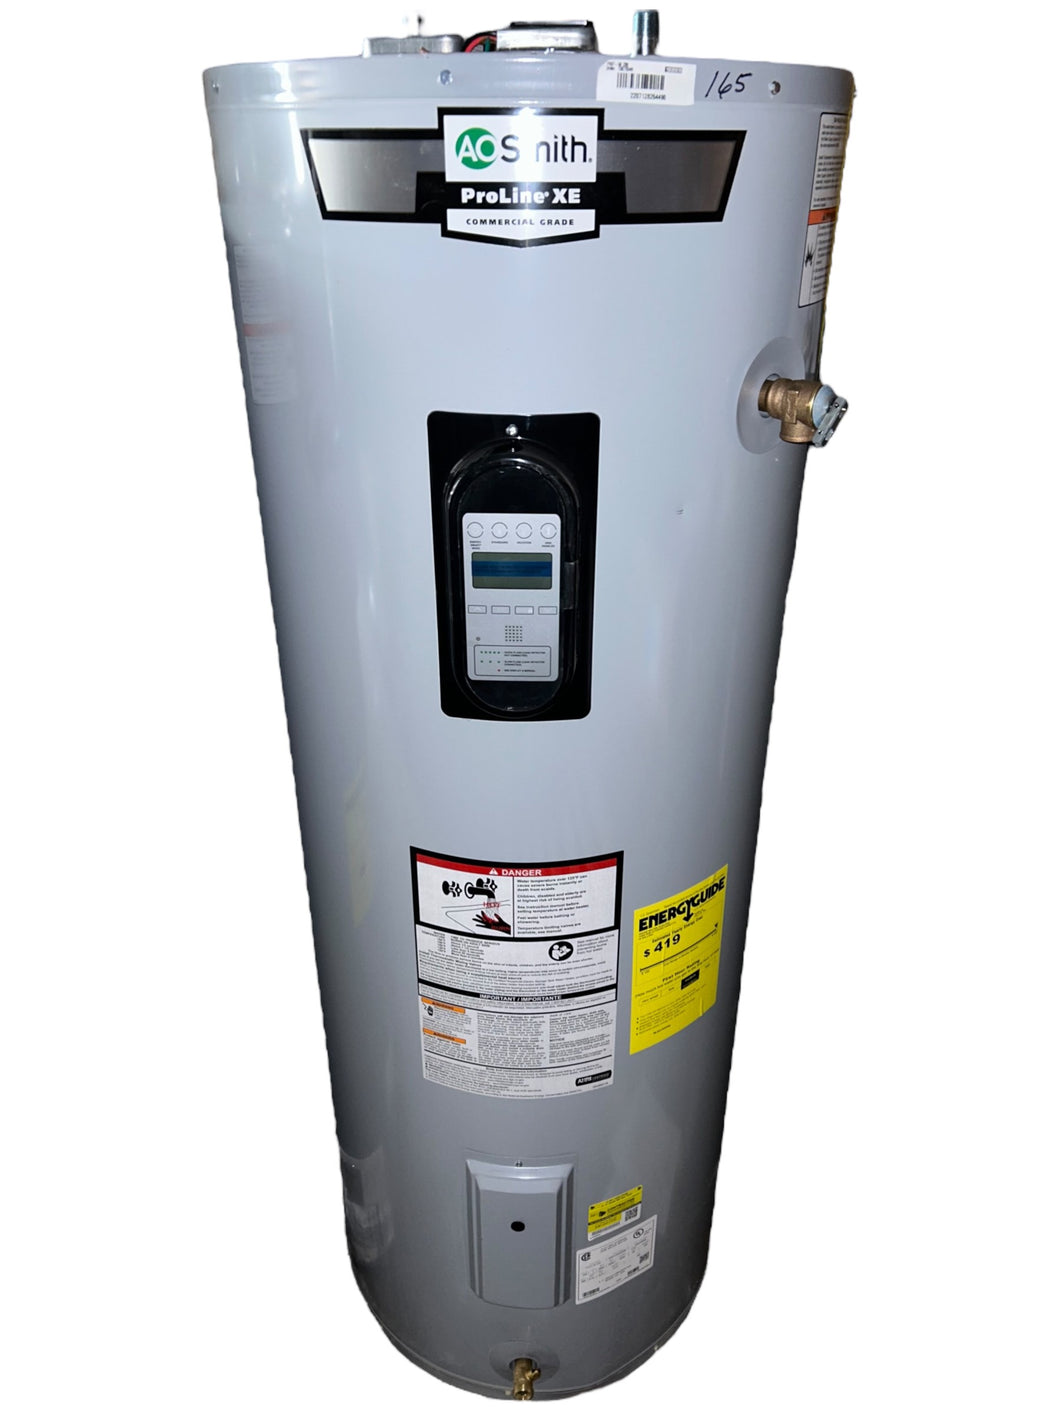 AO Smith, PXGT-50 200, ProLine XE, 50-Gallon, Tall, Electric Water Heater with Leak Detection - FreemanLiquidators - [product_description]